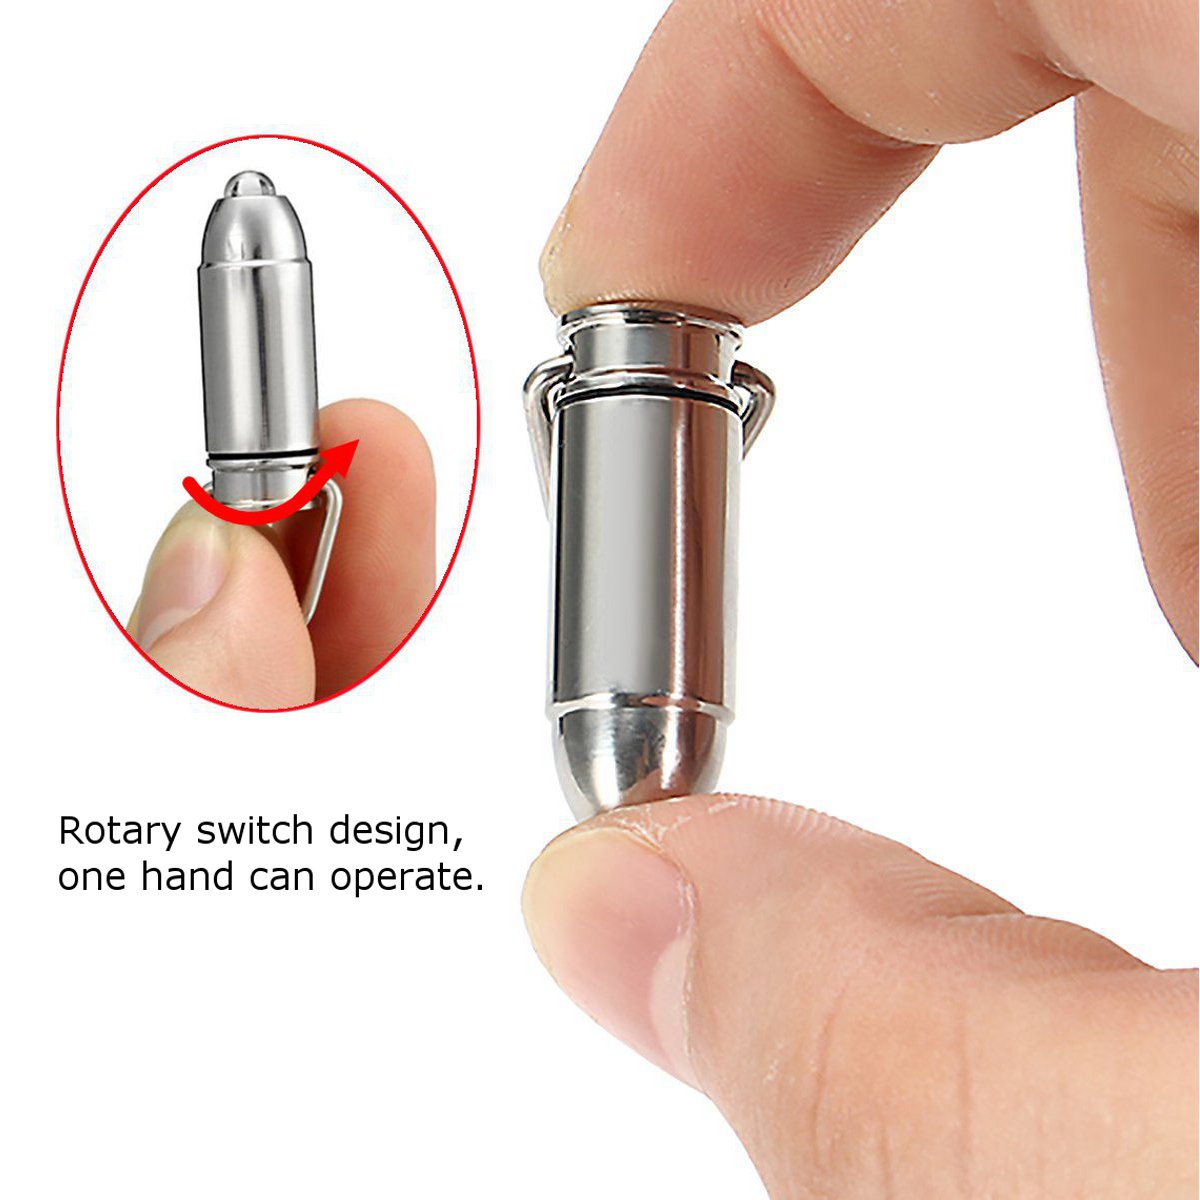 Mini-LED-Keychain-Flashlight-45lm-Portable-Pocket-Tactical-EDC-Torch-Camping-Hunting-1193880-3